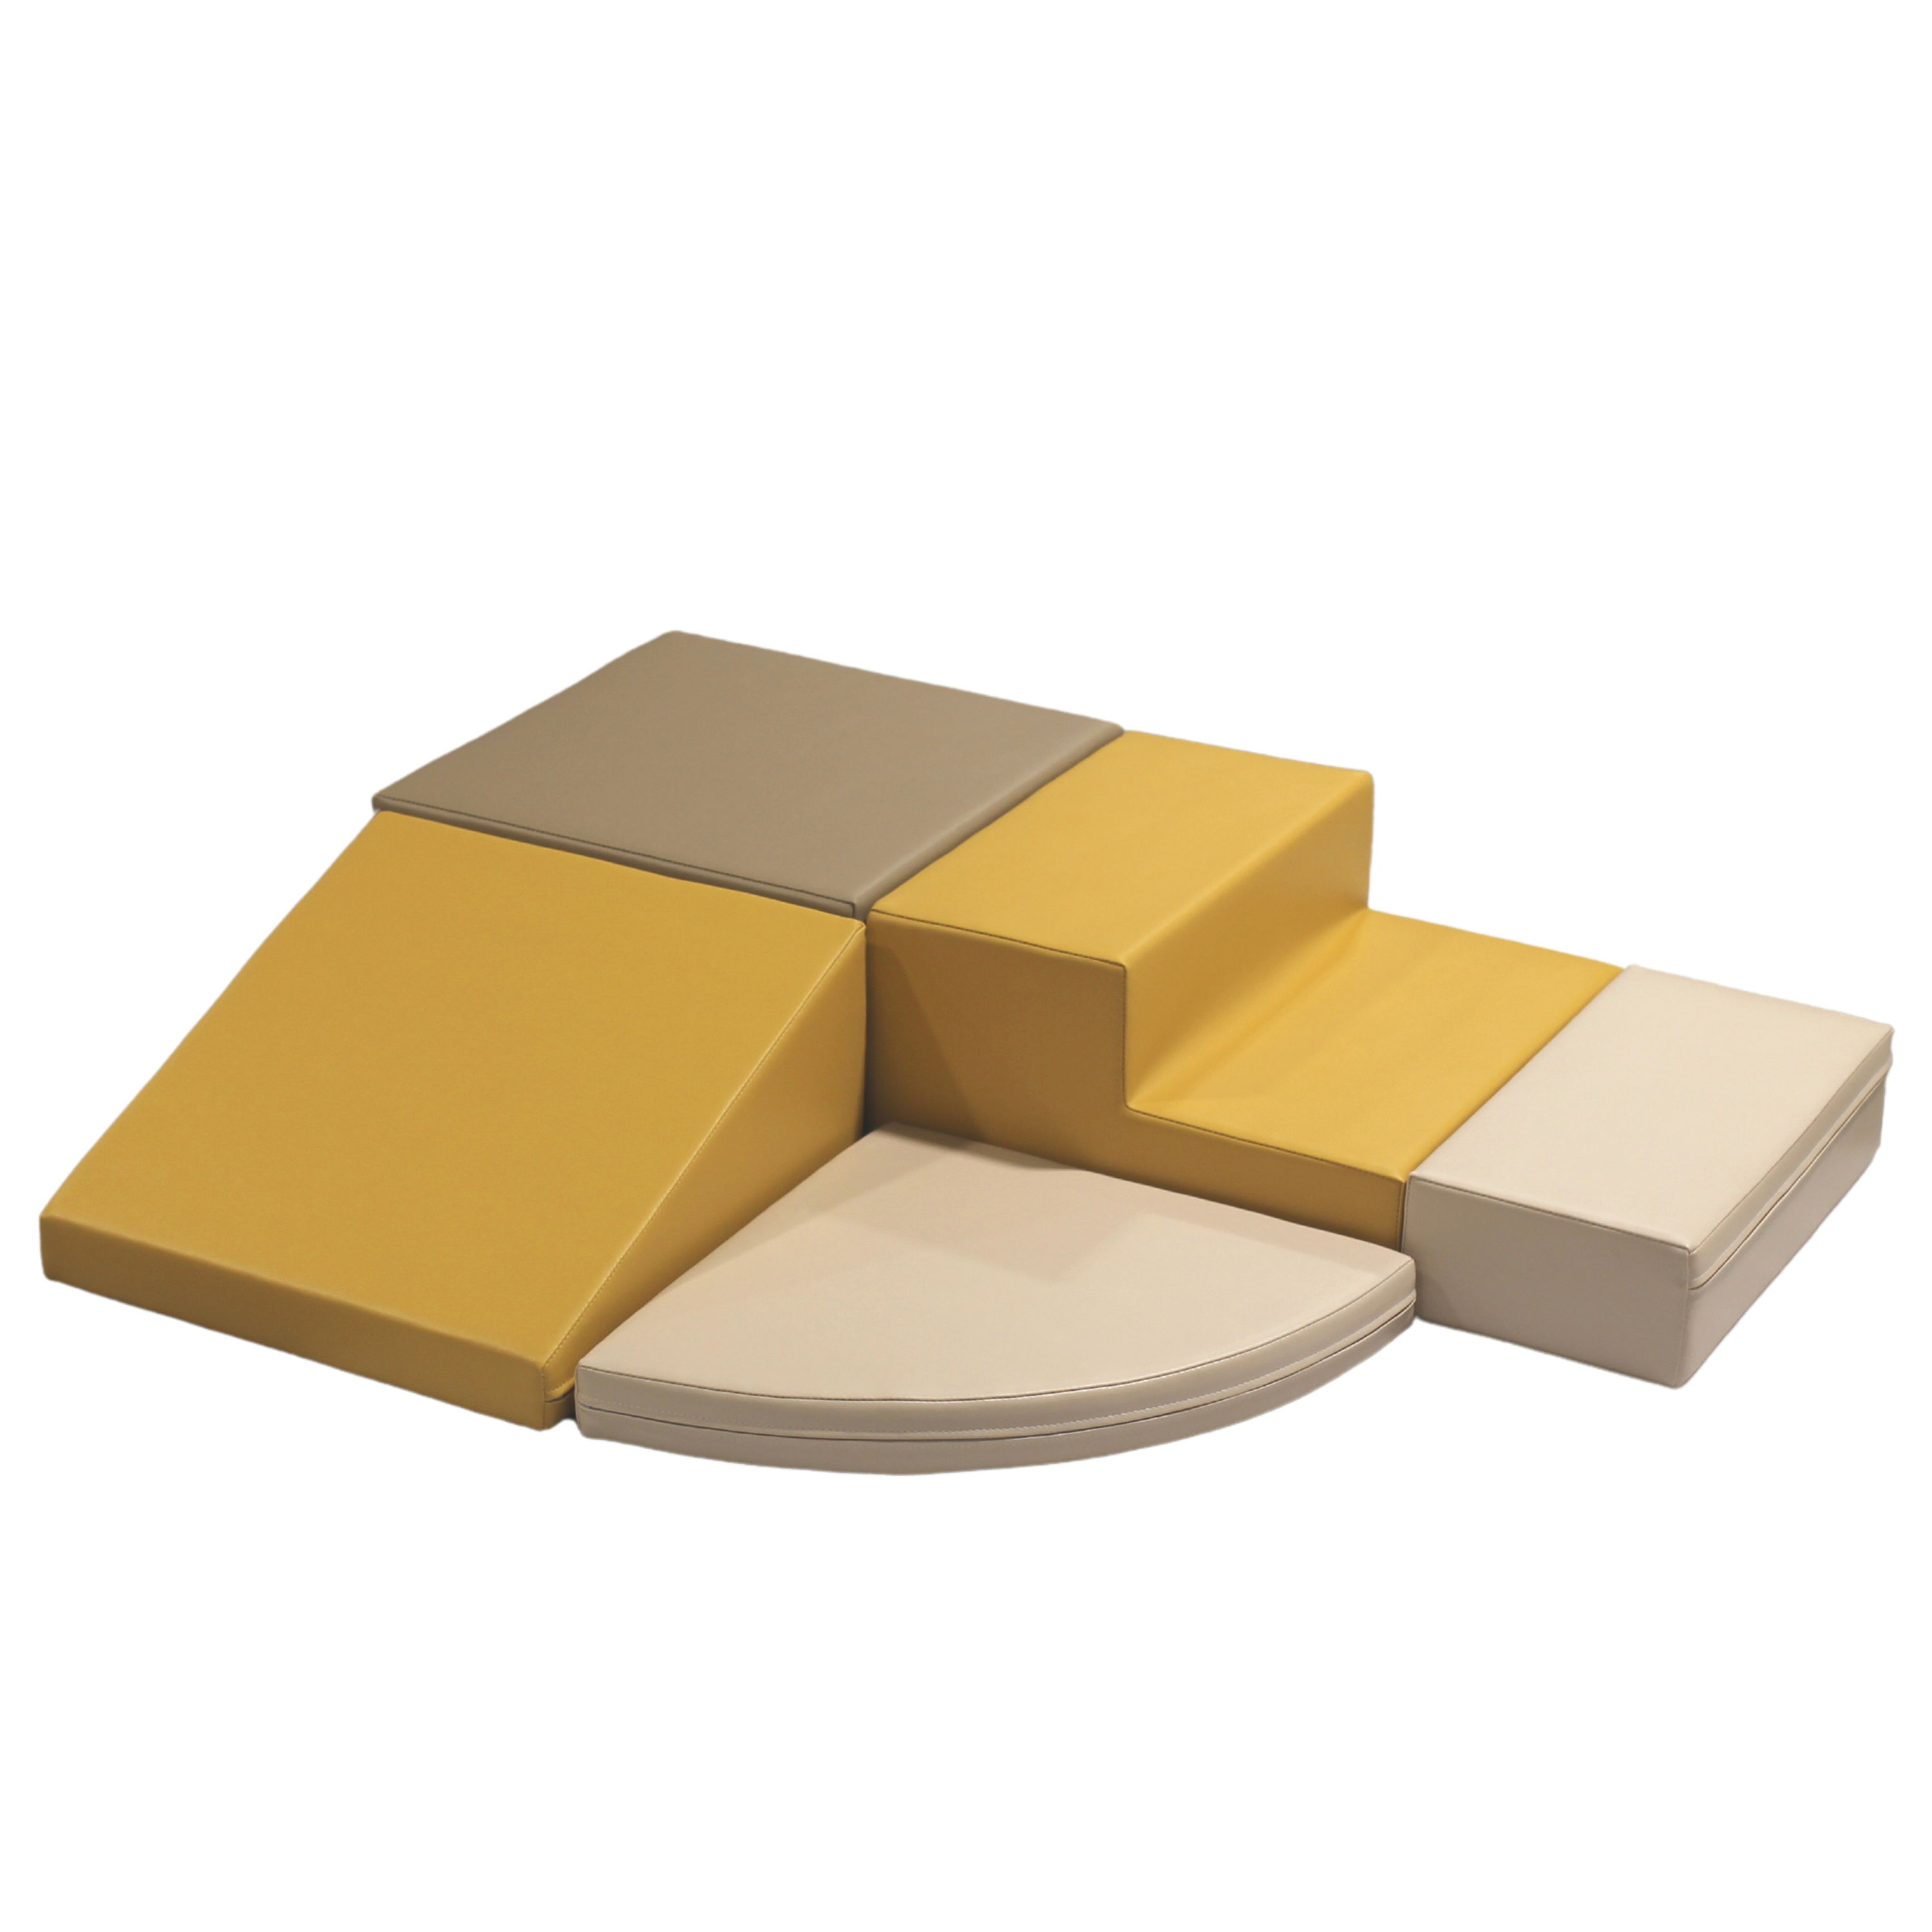 Yellow and brown slide and step set from IGLU